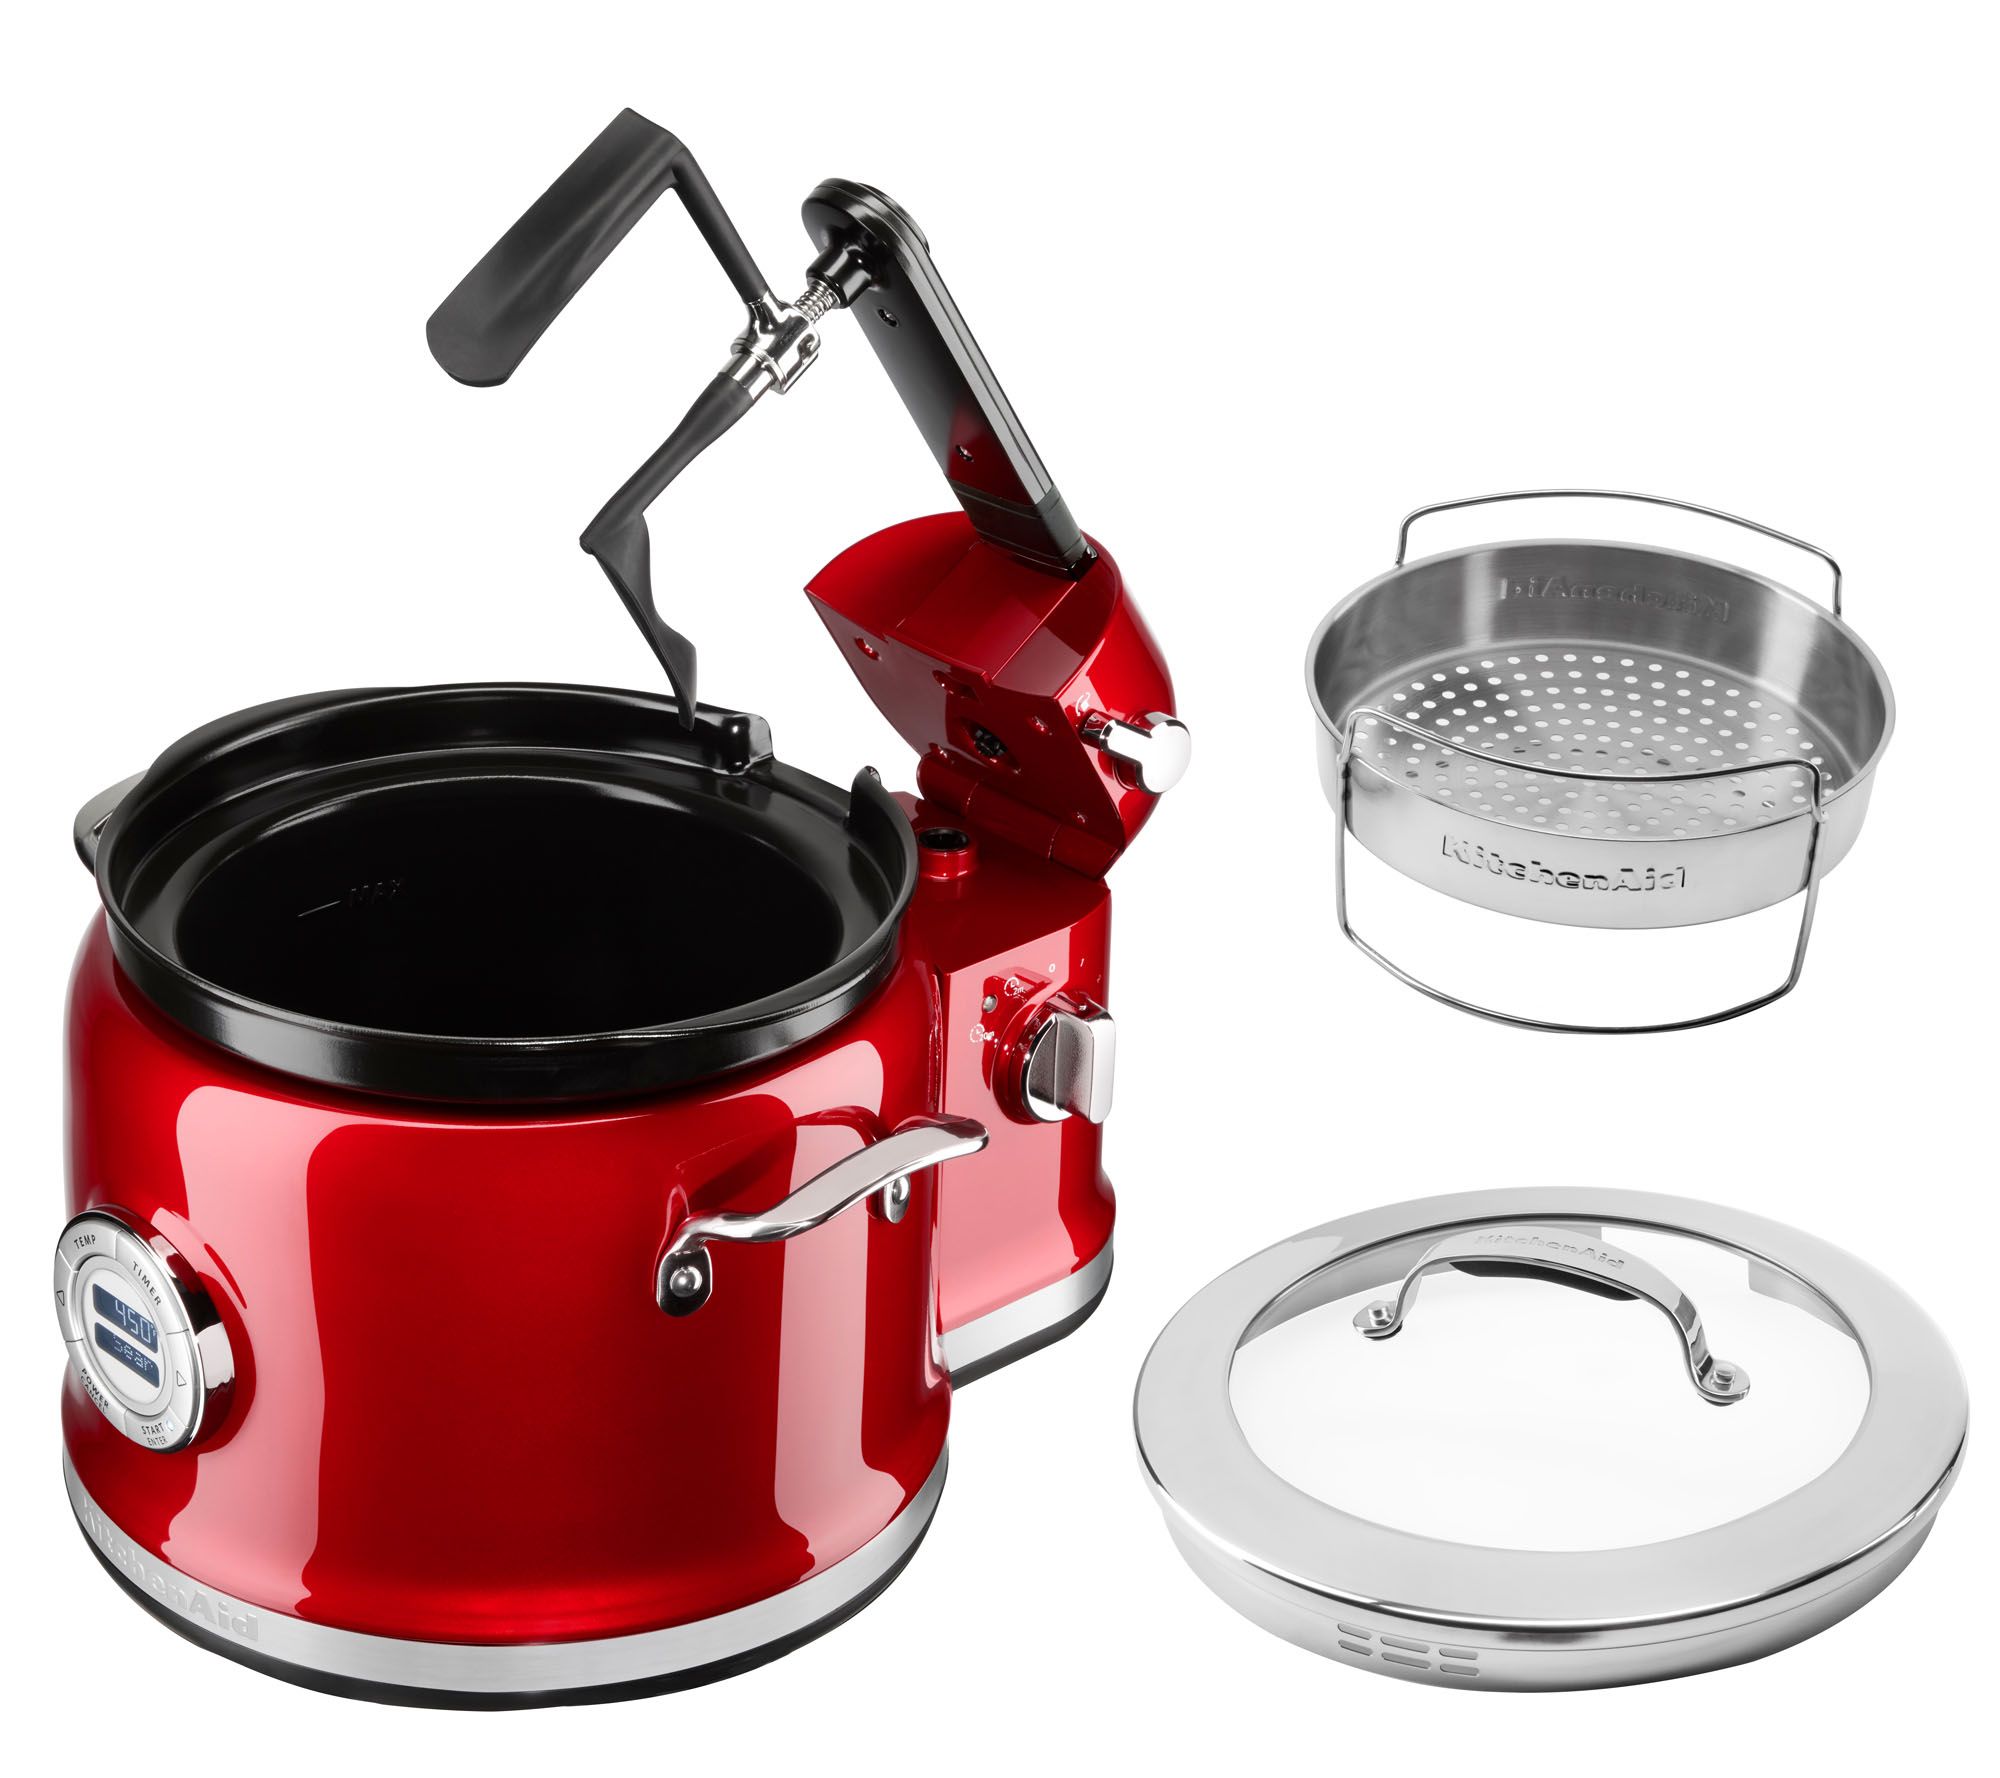 KitchenAid - Use your KitchenAid® Multi-Cooker and Stir Tower to